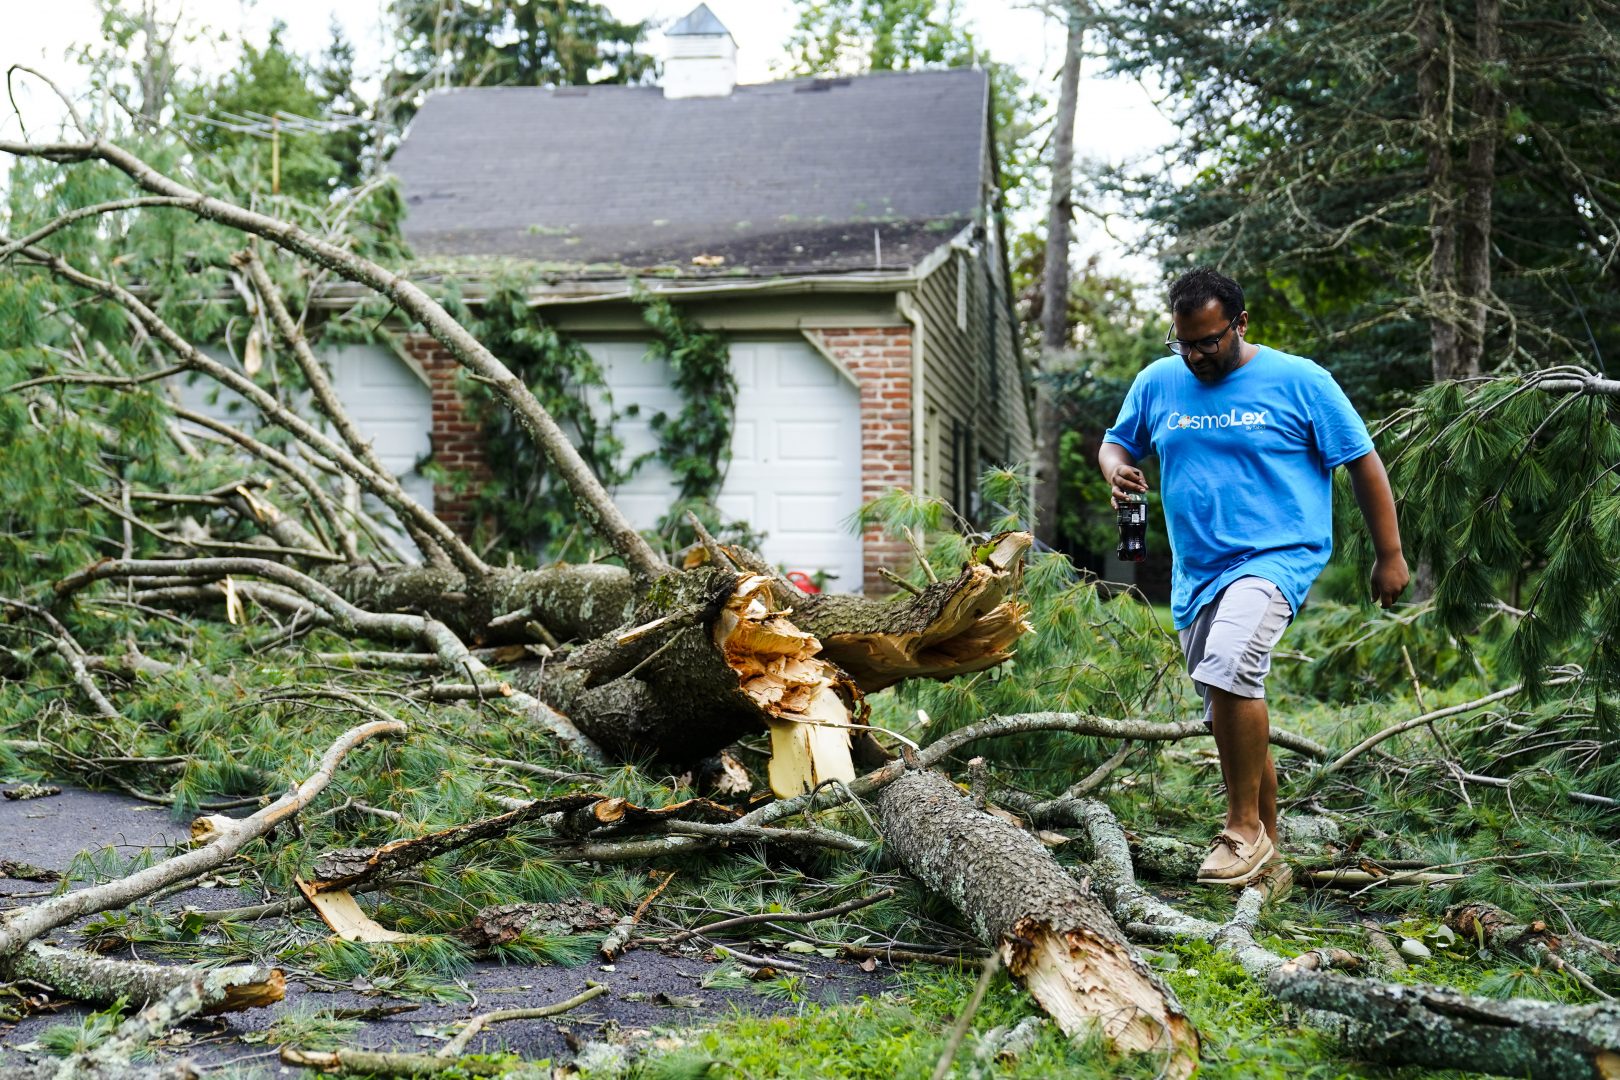 Ajay Khatri inspects his property in the aftermath of a storm in Titusville N.J., Friday, July 30, 2021. AP Photo/Matt Rourke)